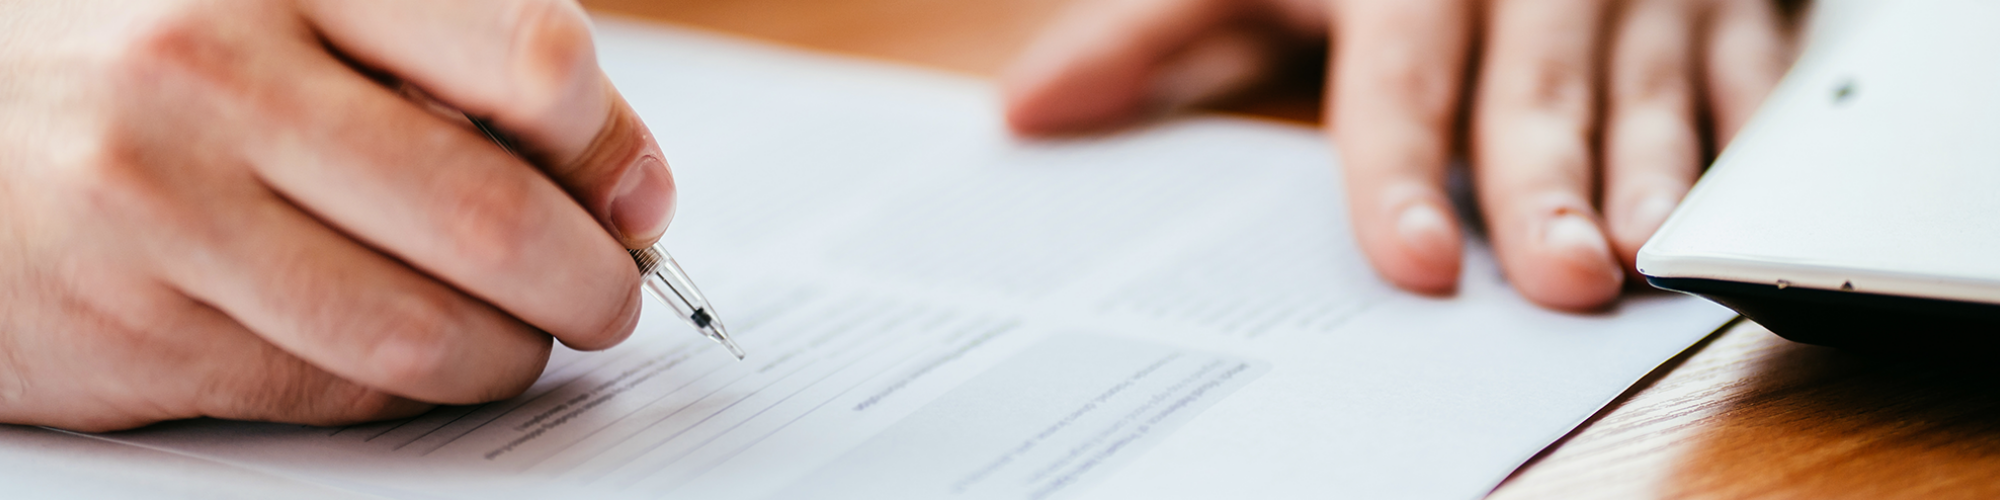 Man in a suit signing a form in an office. Landlord Statutory Declaration. A guide from SAM Conveyancing on how to file a statutory declaration form